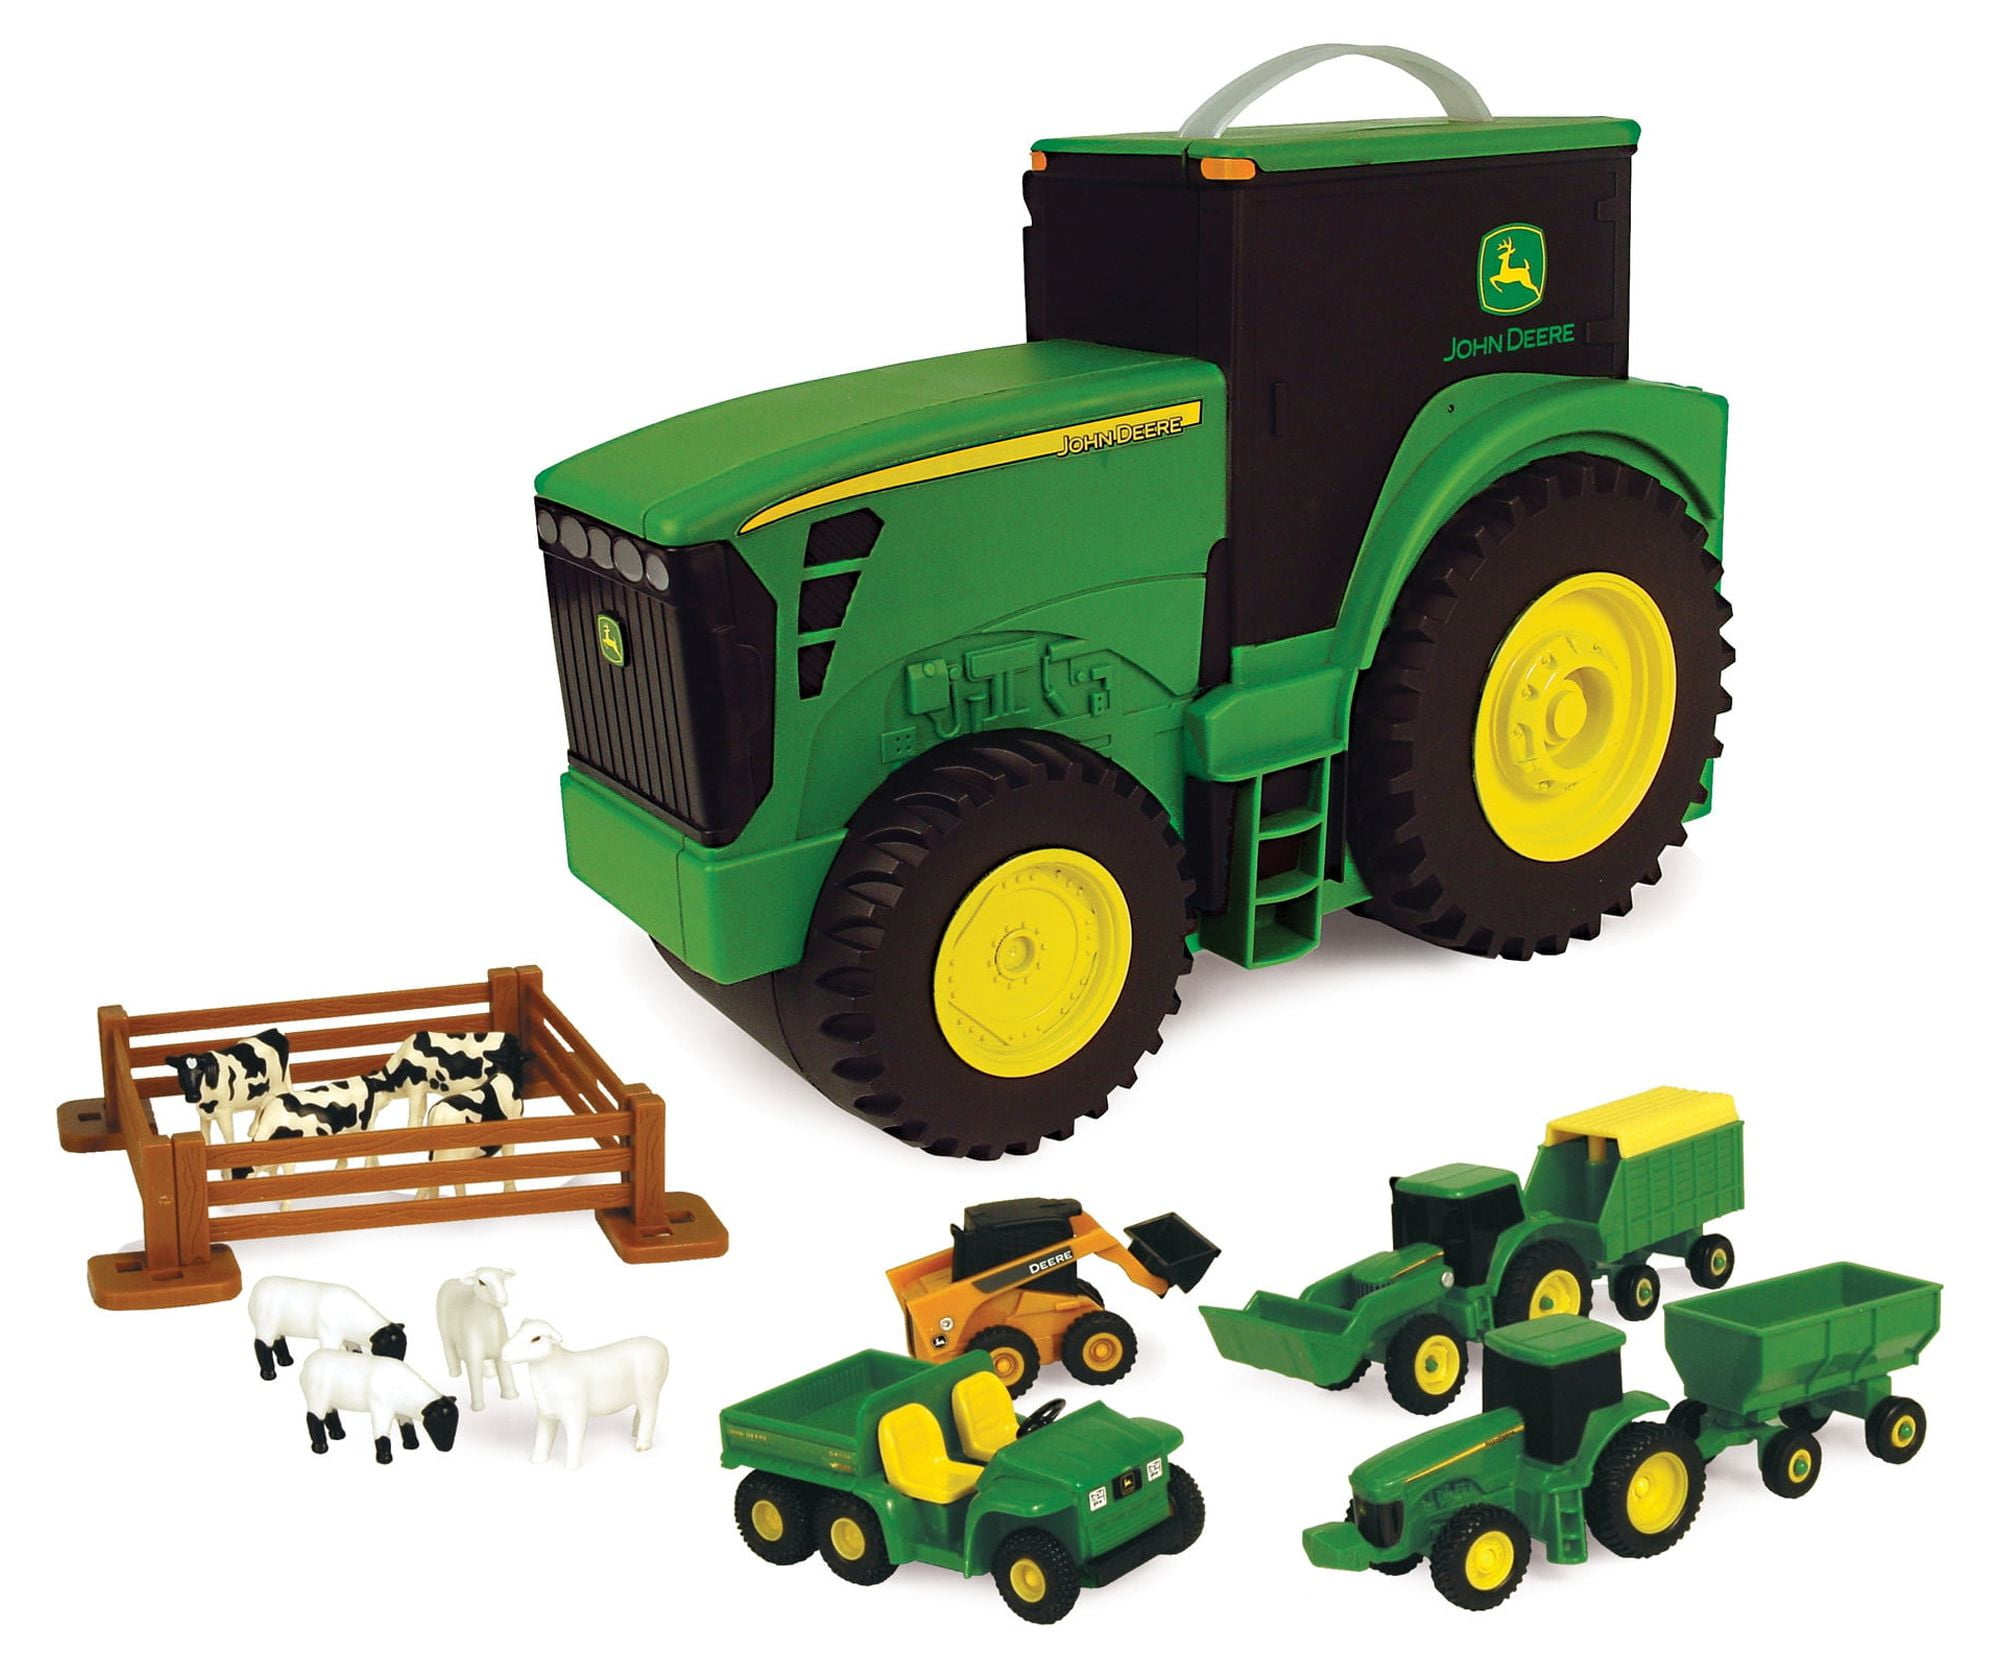 John Deere Tractor Toy Carry Case Value